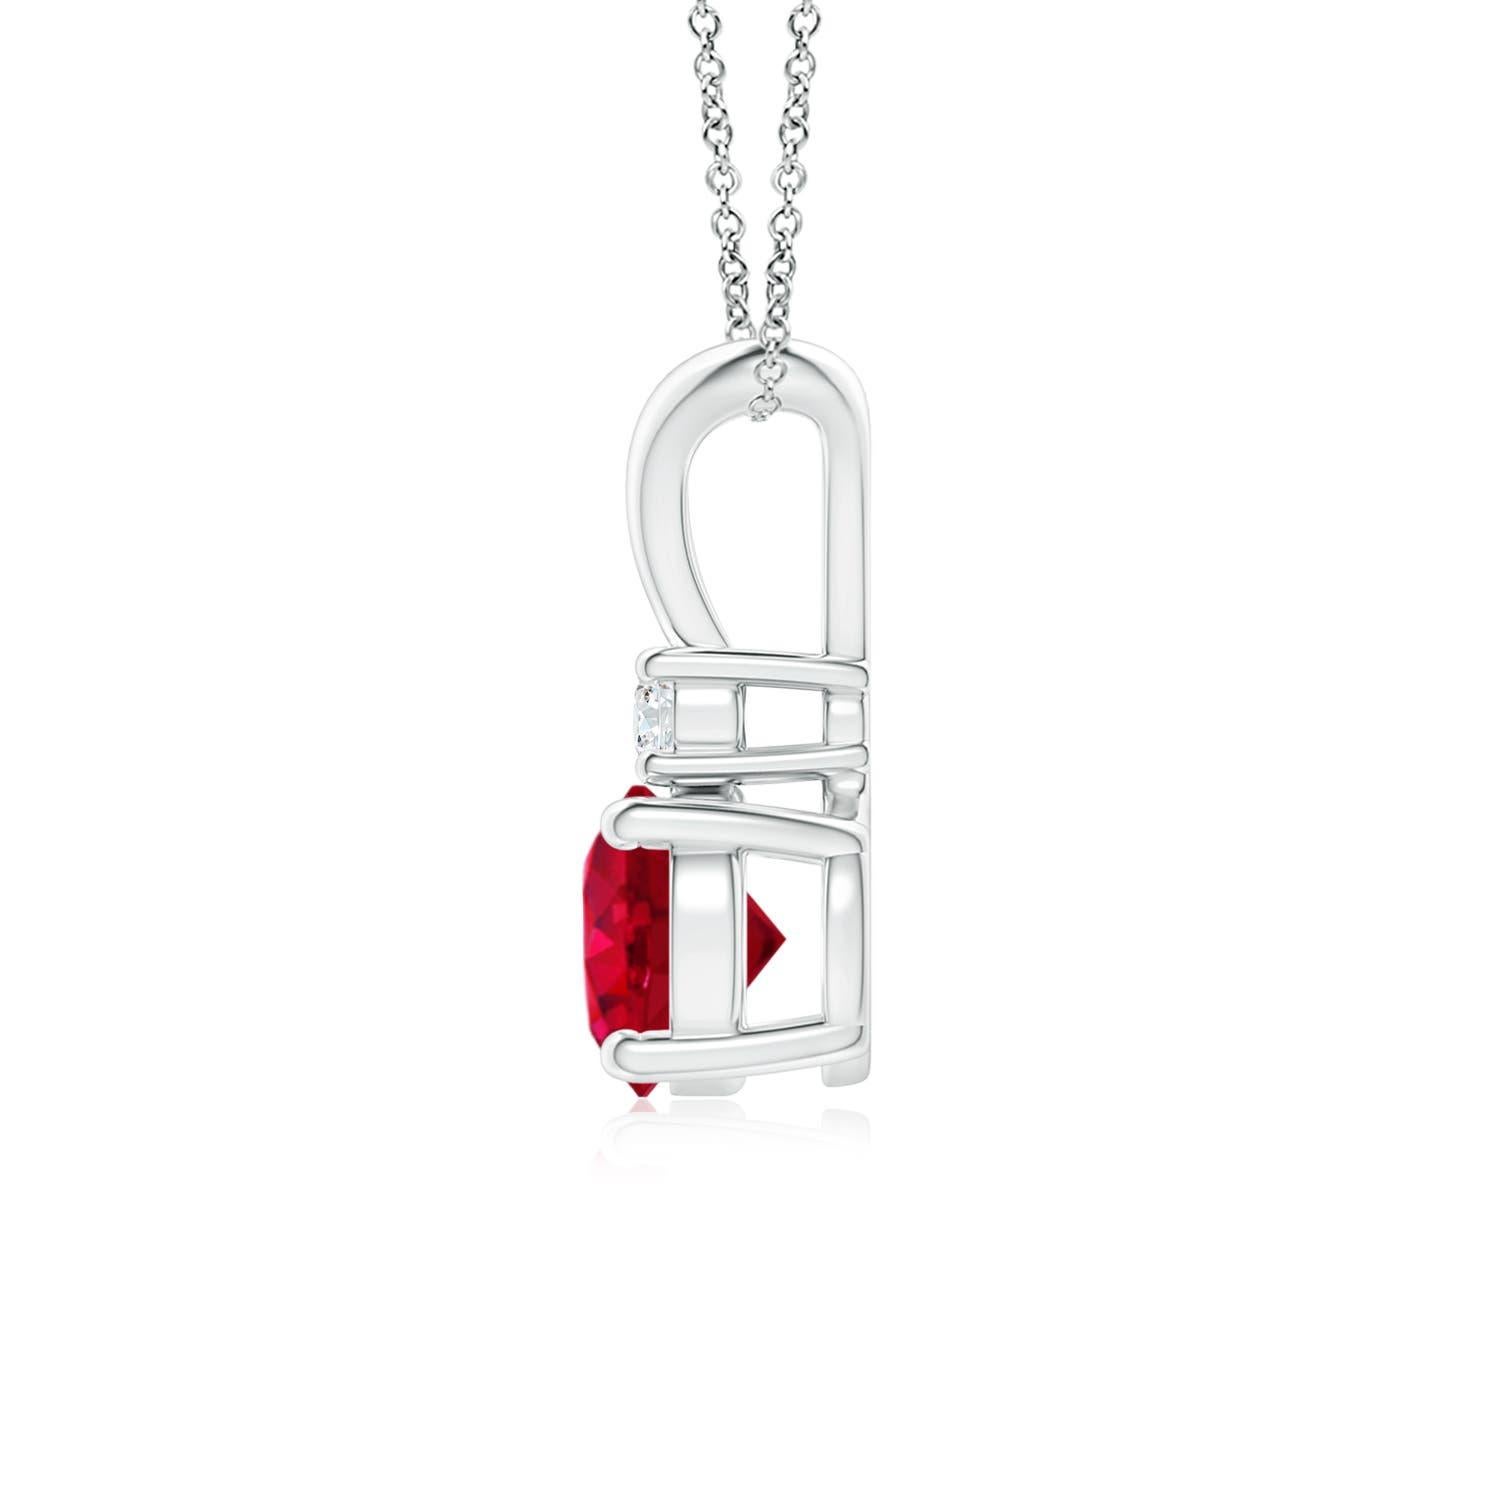 This four-prong set ruby pendant displays the perfect blend of style and beauty. A lustrous diamond on top of the purplish red gemstone enhances its charm. This classic solitaire ruby pendant with a polished v-bale is artfully designed in